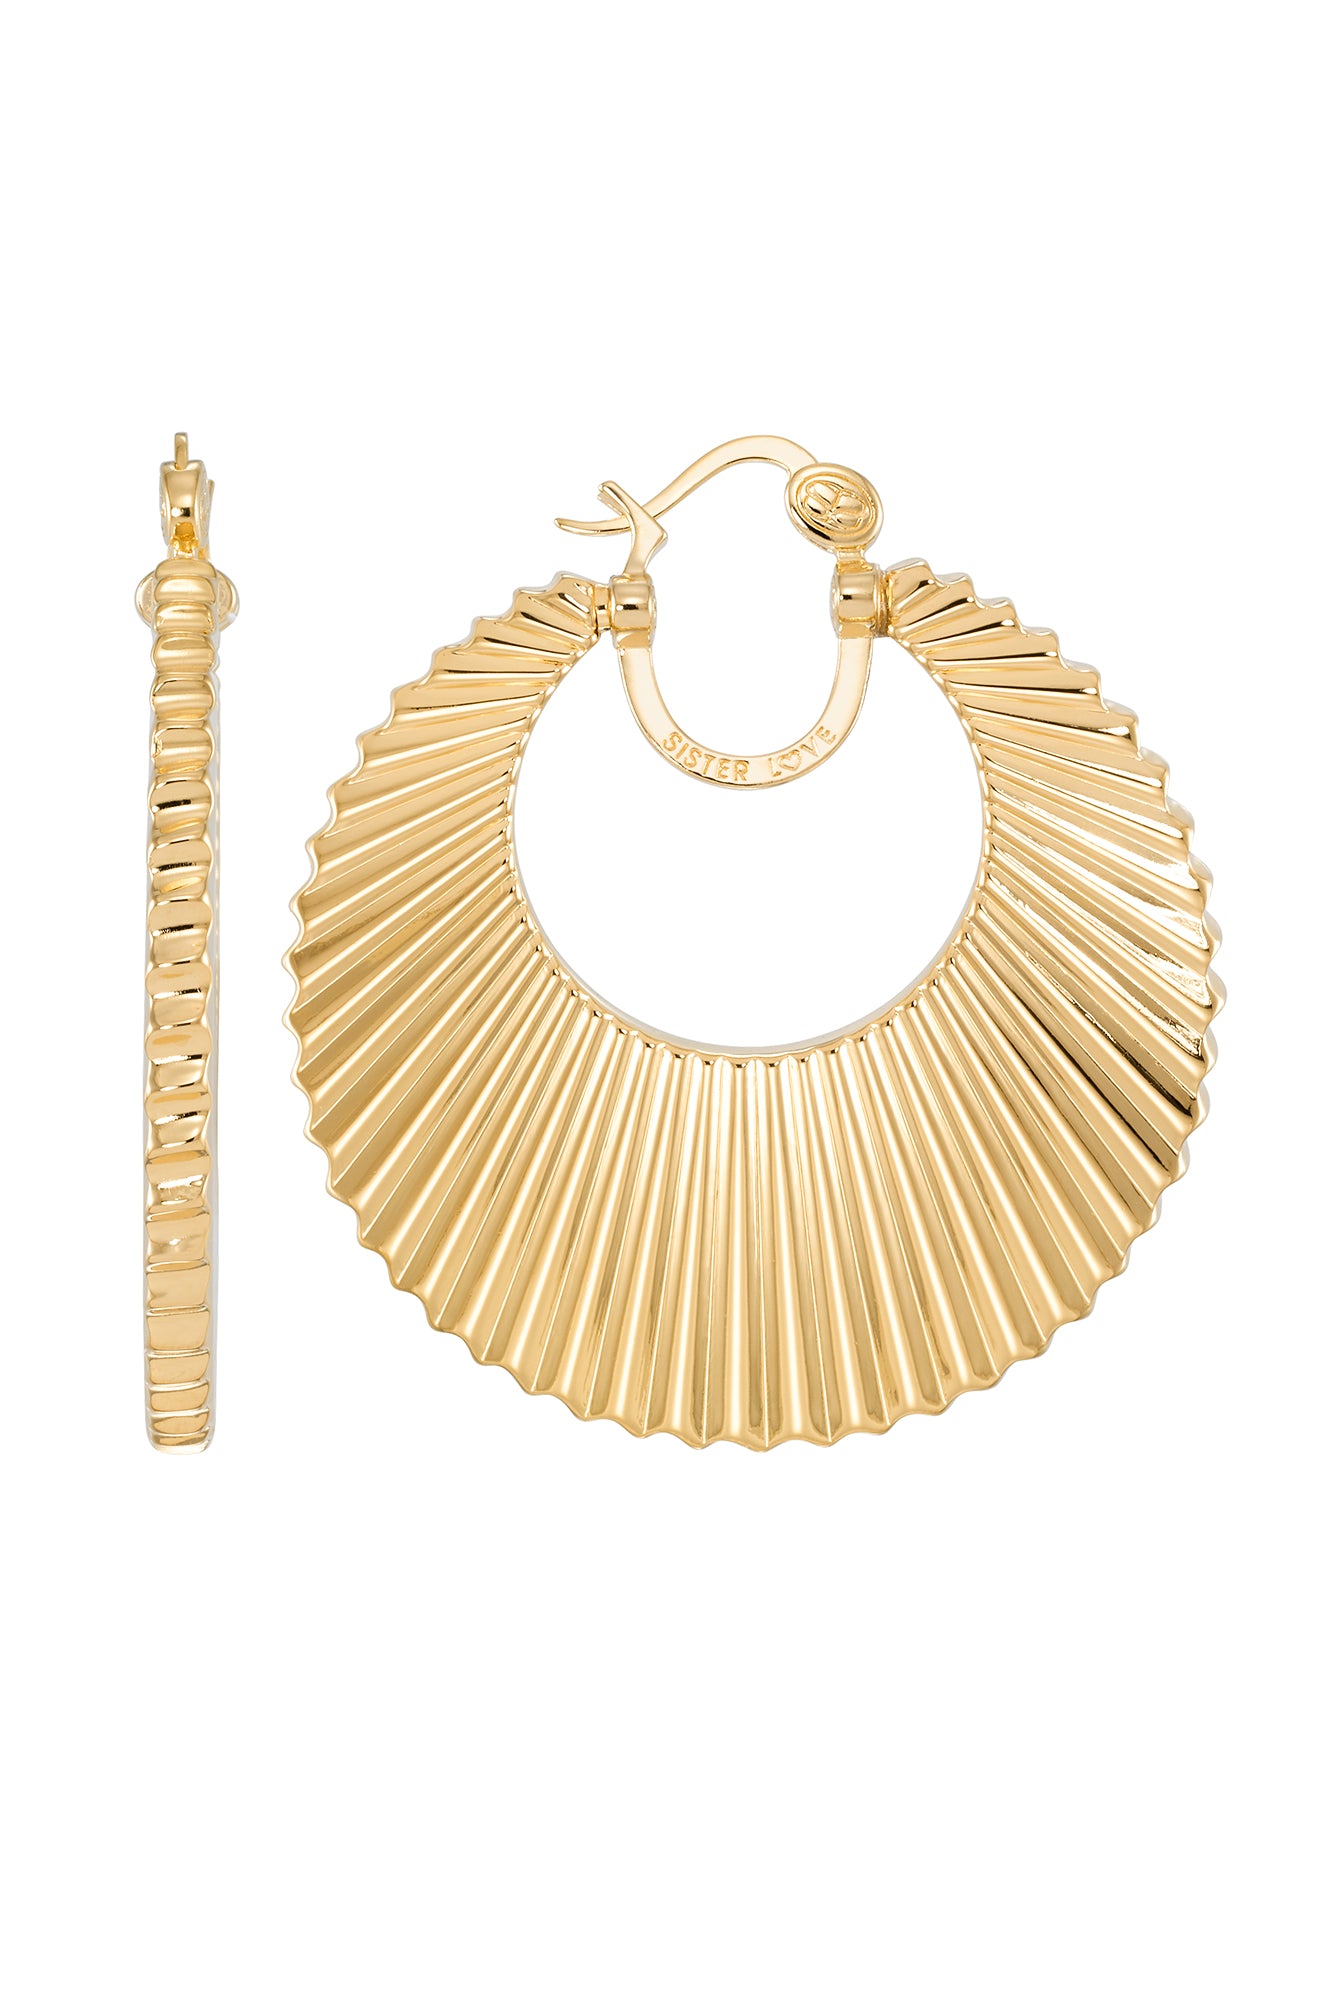 Mary J. Blige And LL Cool J's Wife Launch Jewelry Collaboration